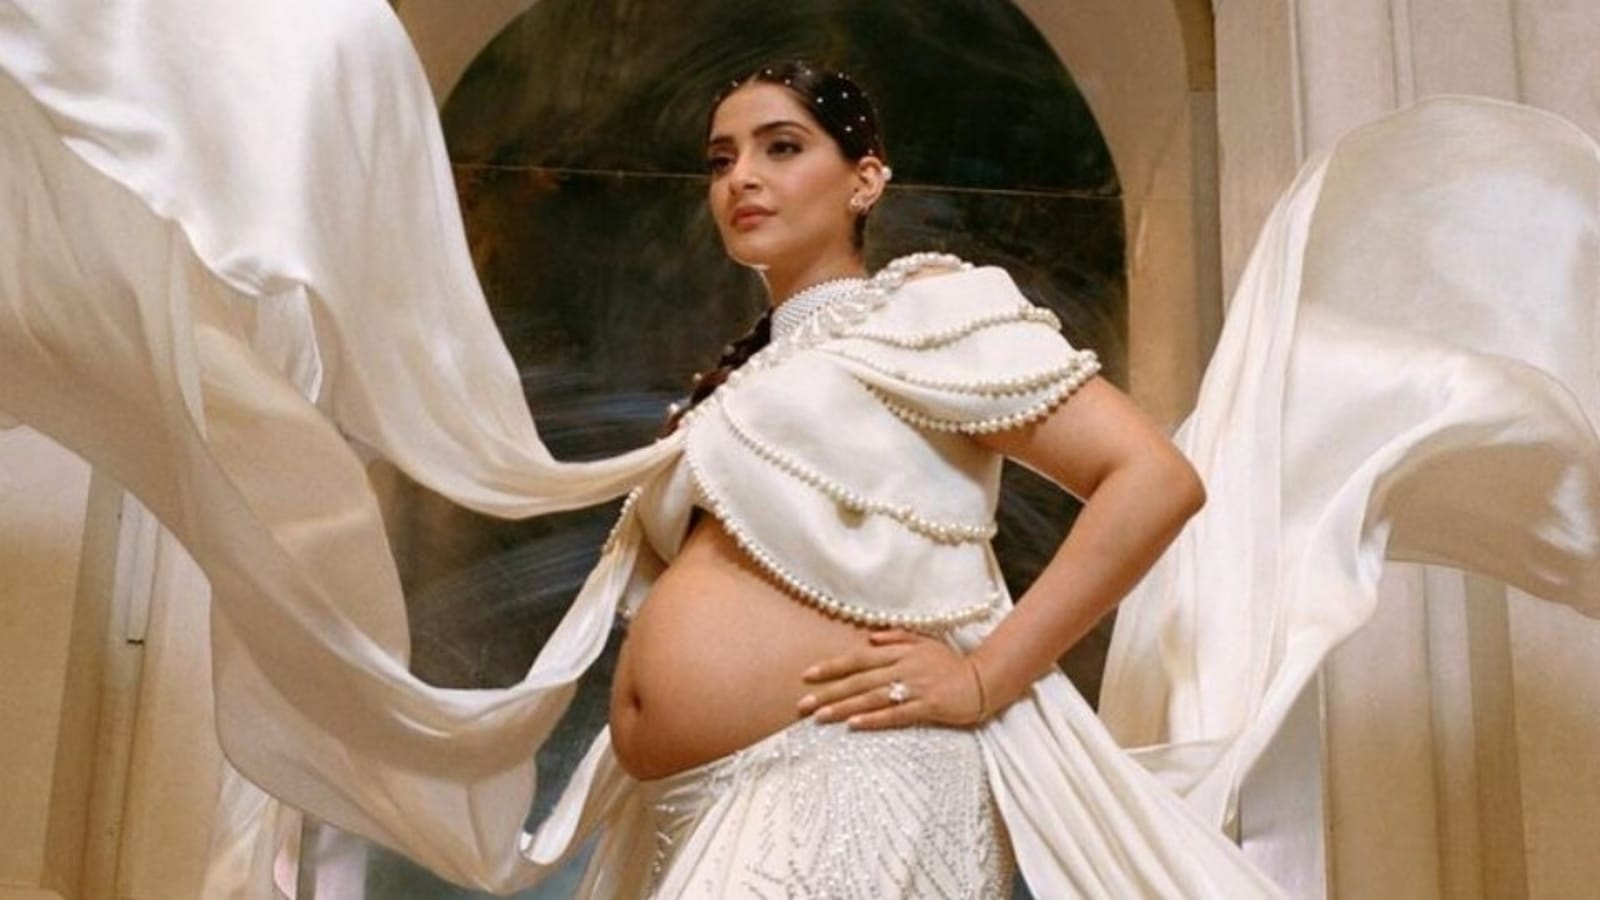 Birthday girl Sonam Kapoor displays baby bump in ivory blouse and skirt set for regal pregnancy photoshoot